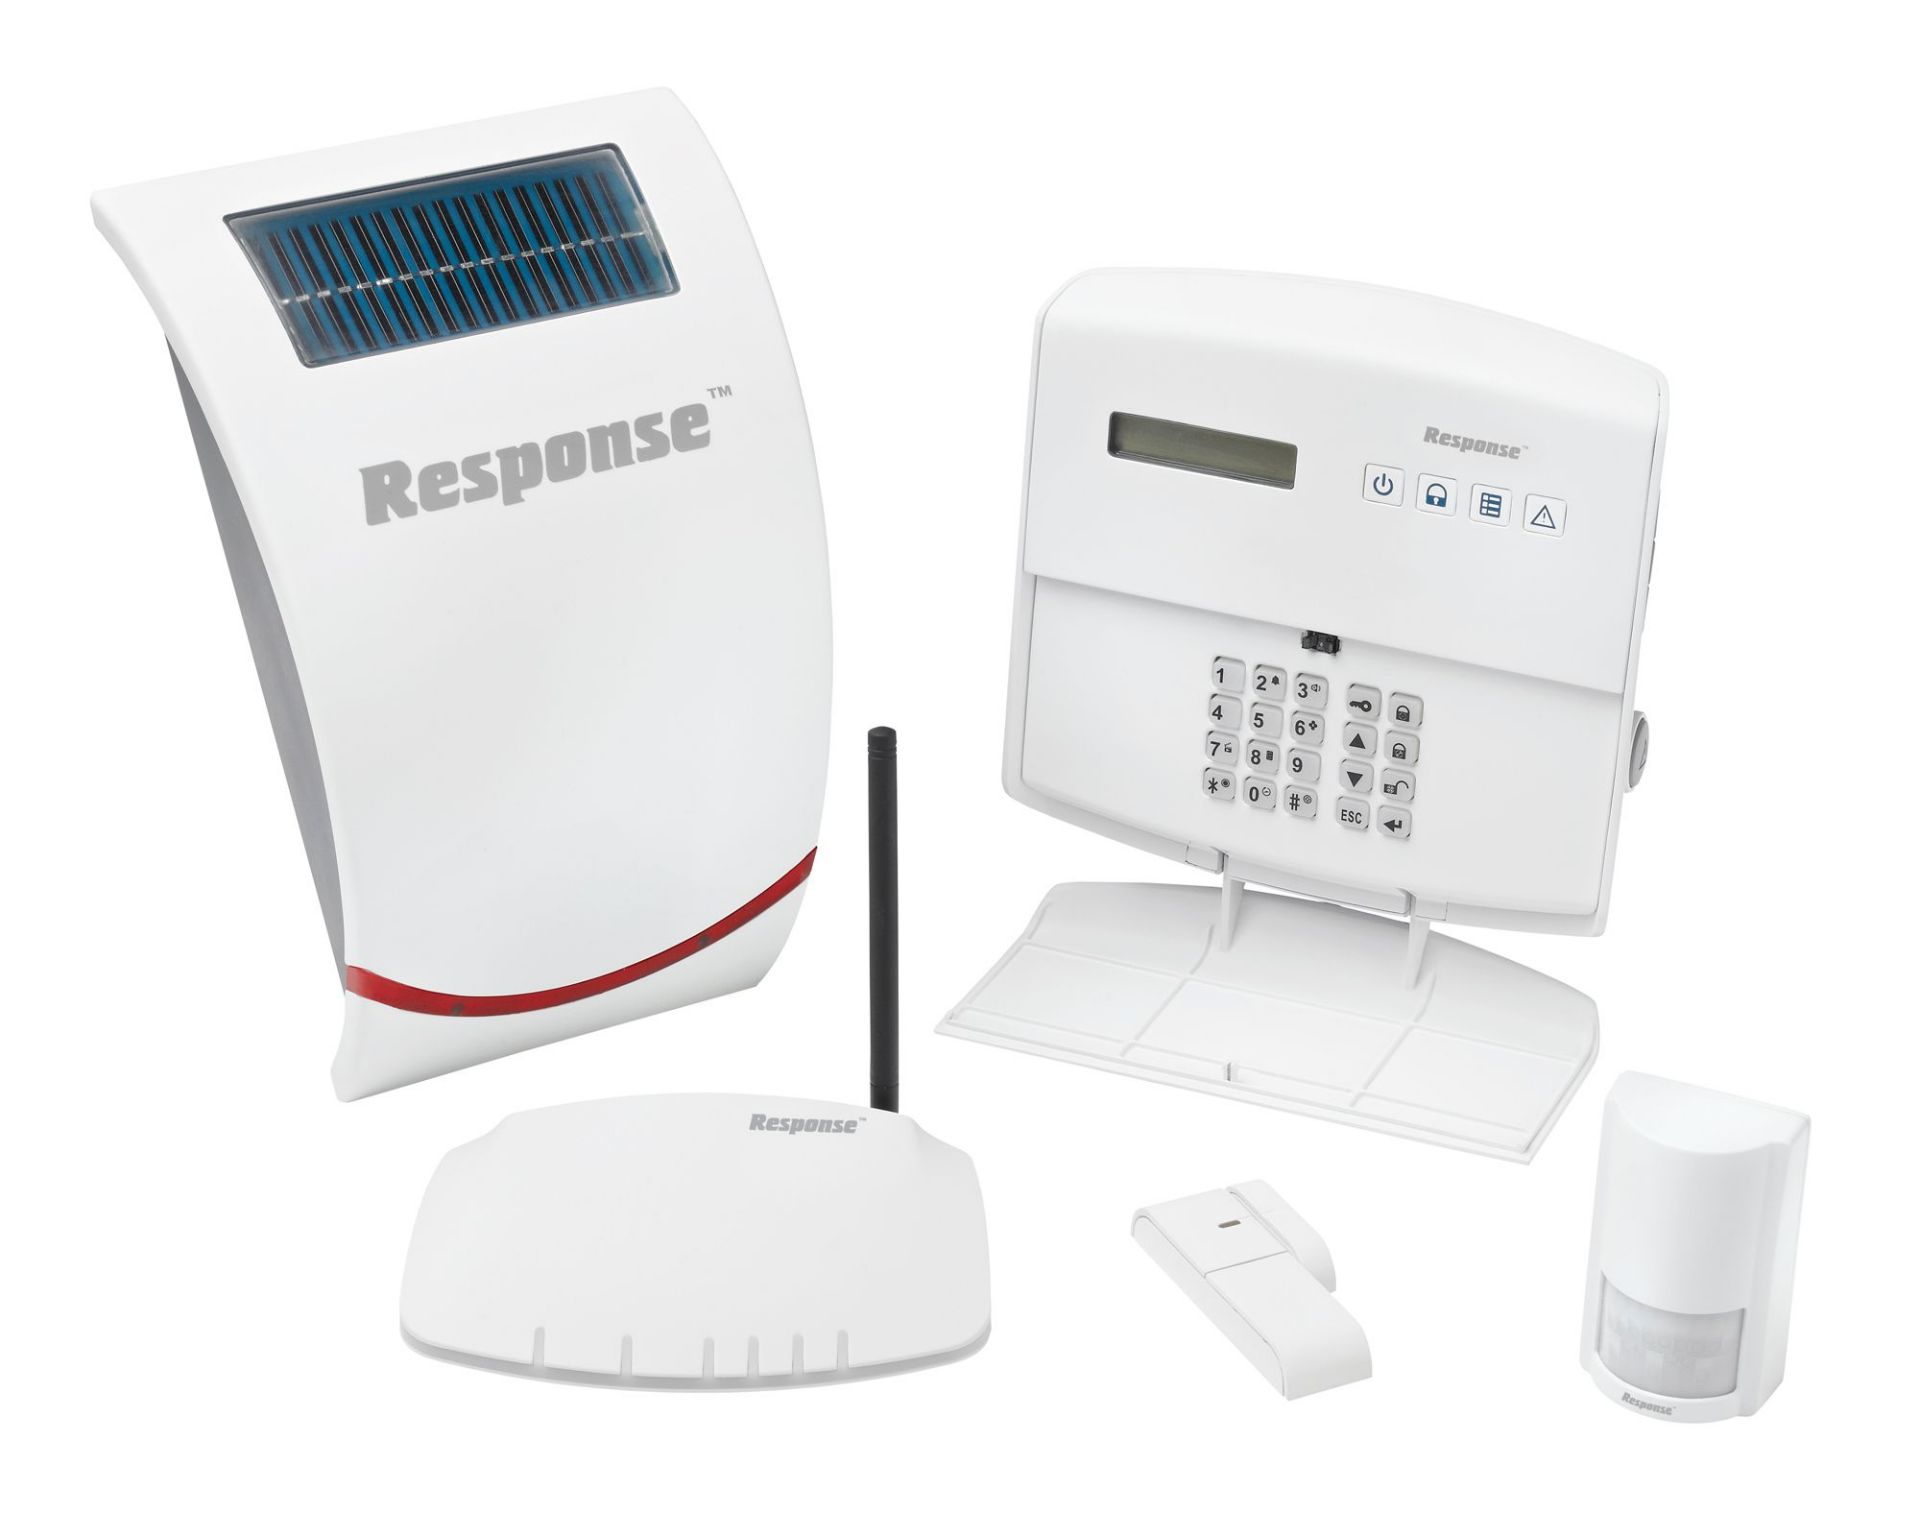 V *TRADE QTY* Brand New GlobalGuard Wireless Home Alarm System With Movement Detector - Door